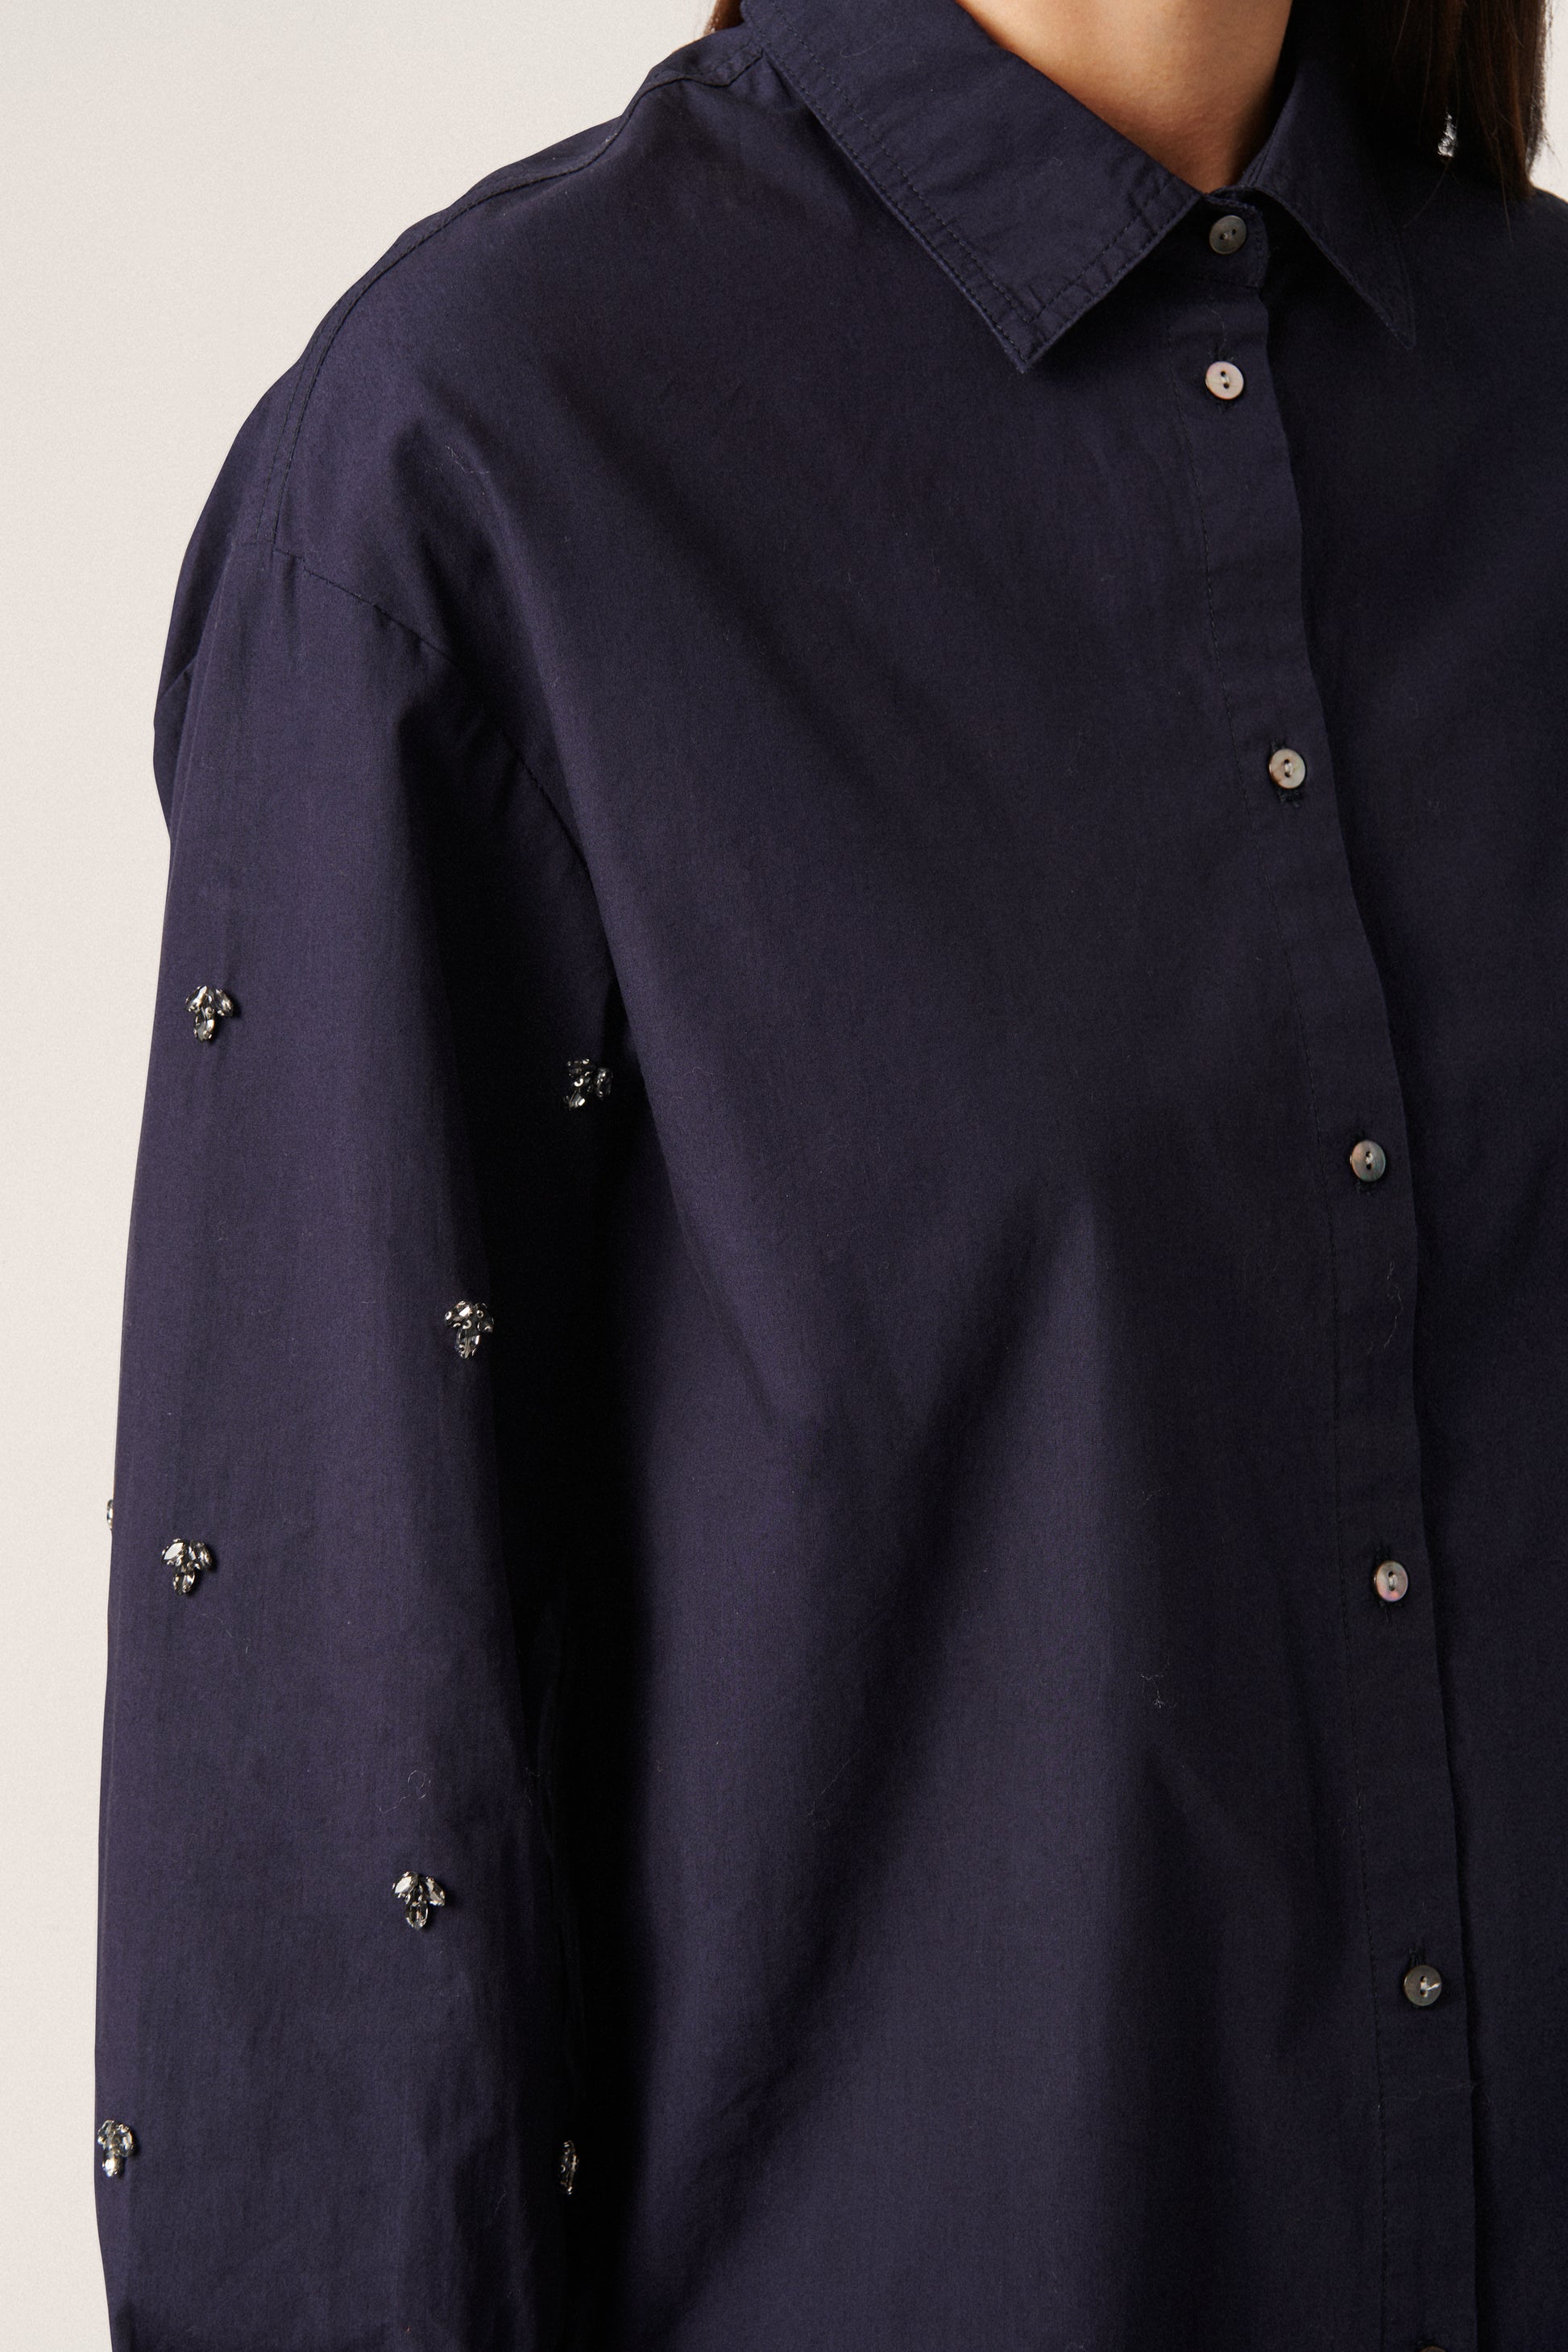 Soaked in Luxury Evelin Shirt Shirts/Blouses Night Sky